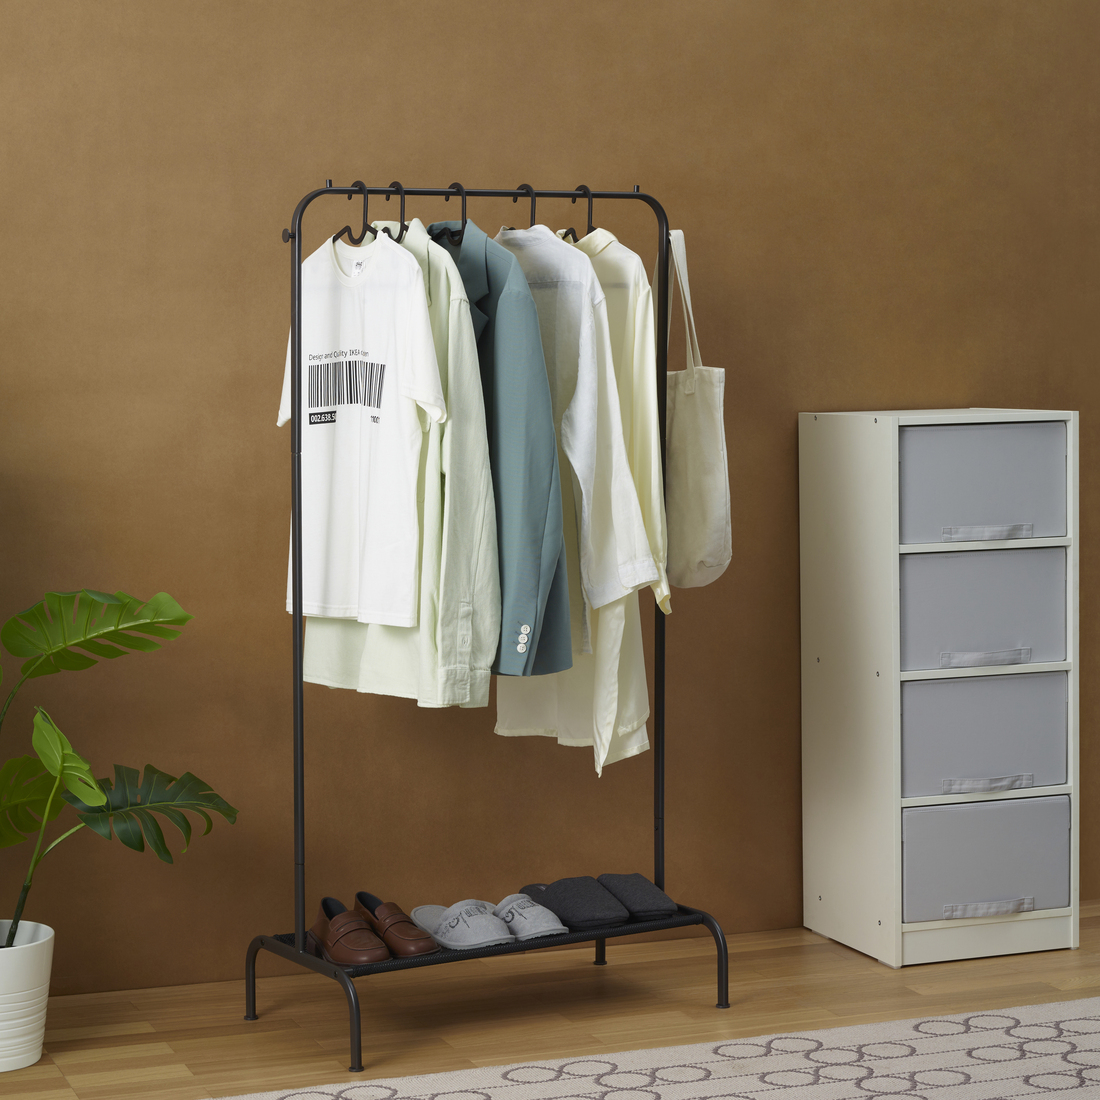 Clothes Organizers - IKEA